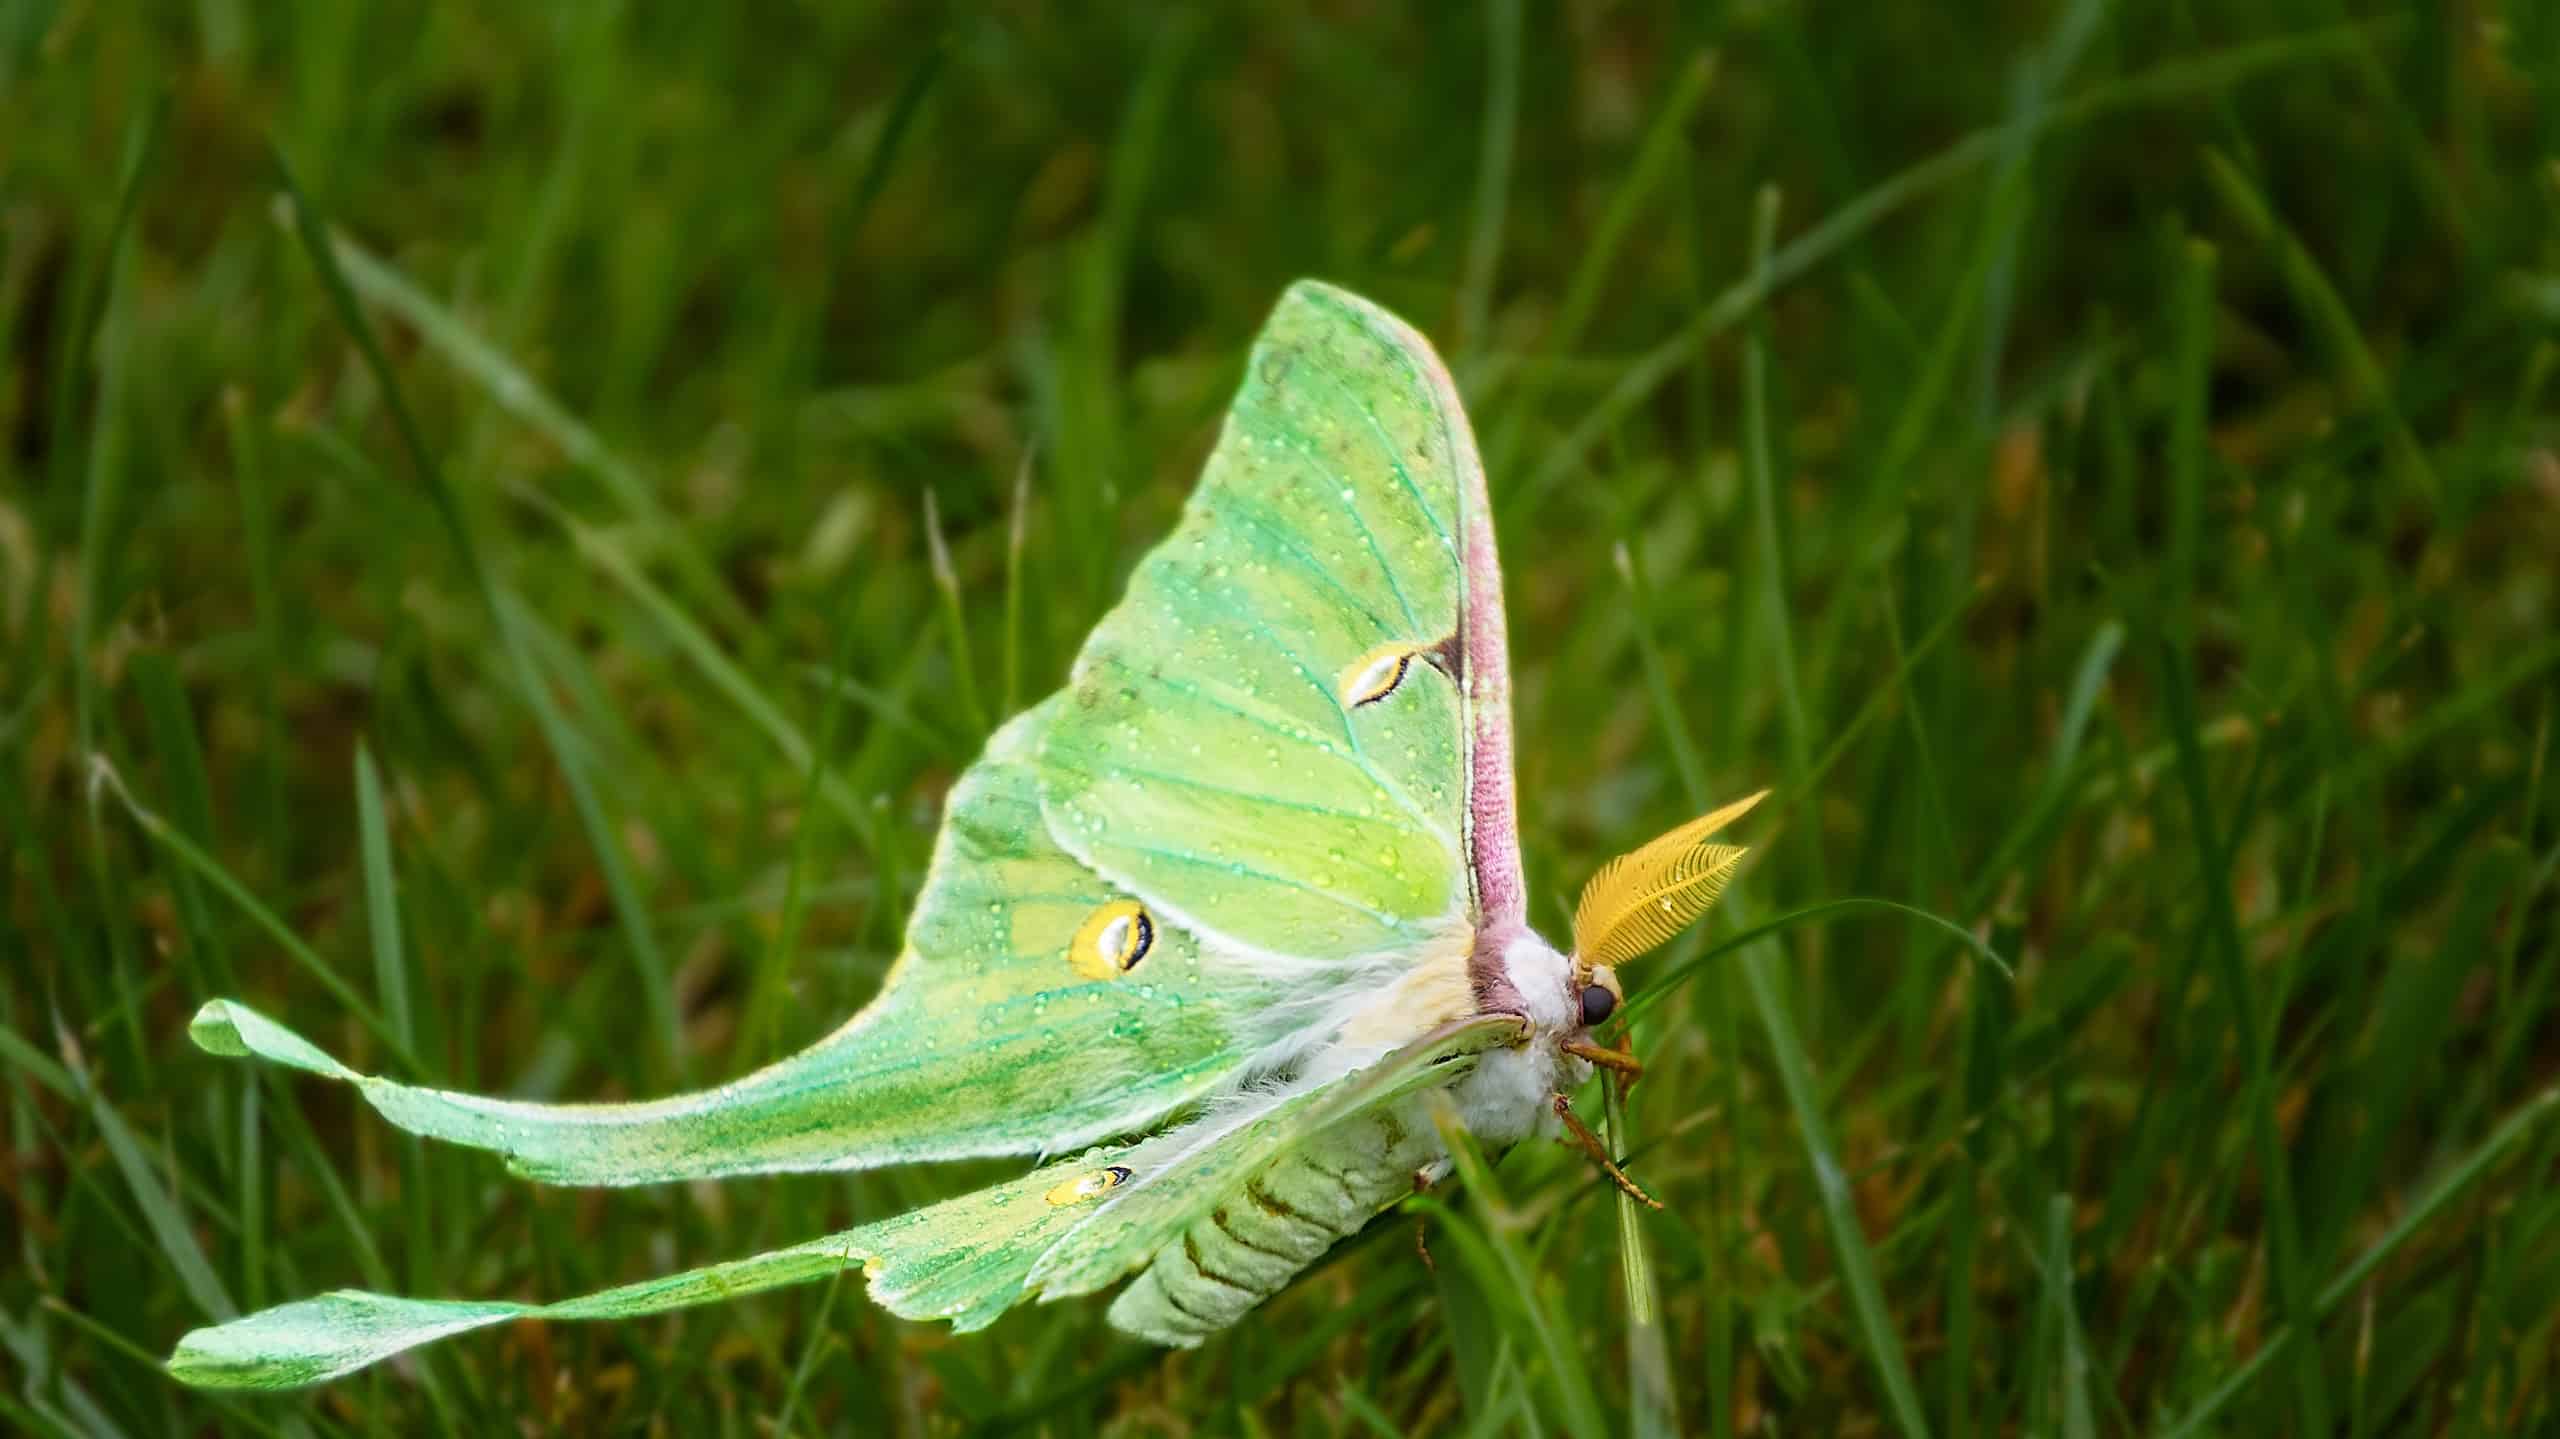 A bright green luna moth , in silhouette. The moth is facing right.It has two yellow antennae visible on top of its head. They look like yellow feathers. It is perched on a blade of grass.